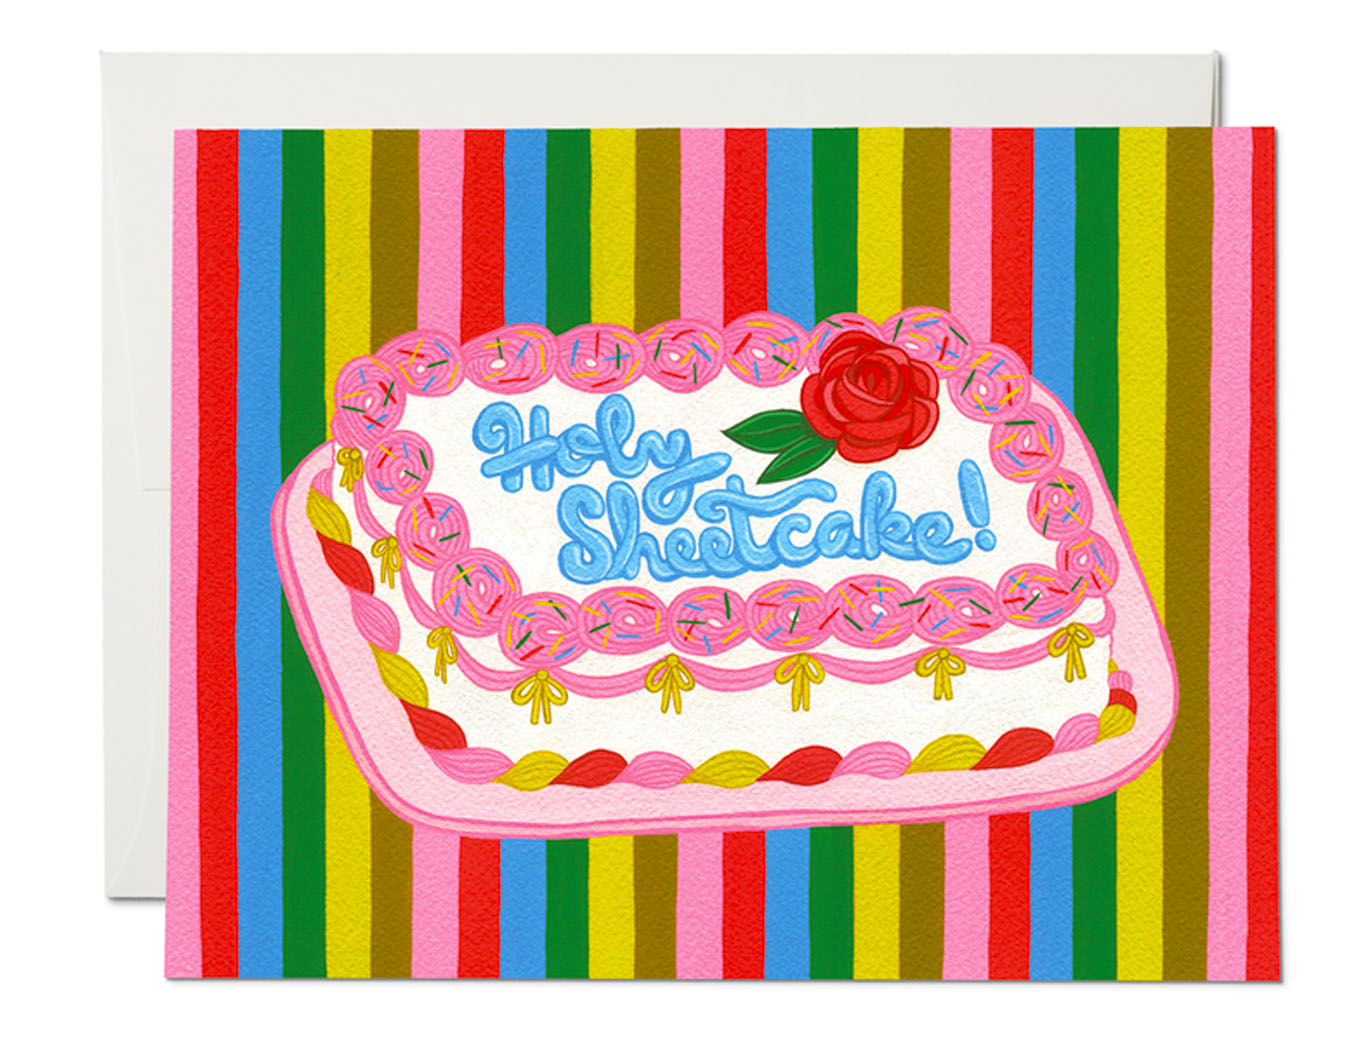 multicolor striped background cute sheet cake with frosting that spells out holy sheetcake!